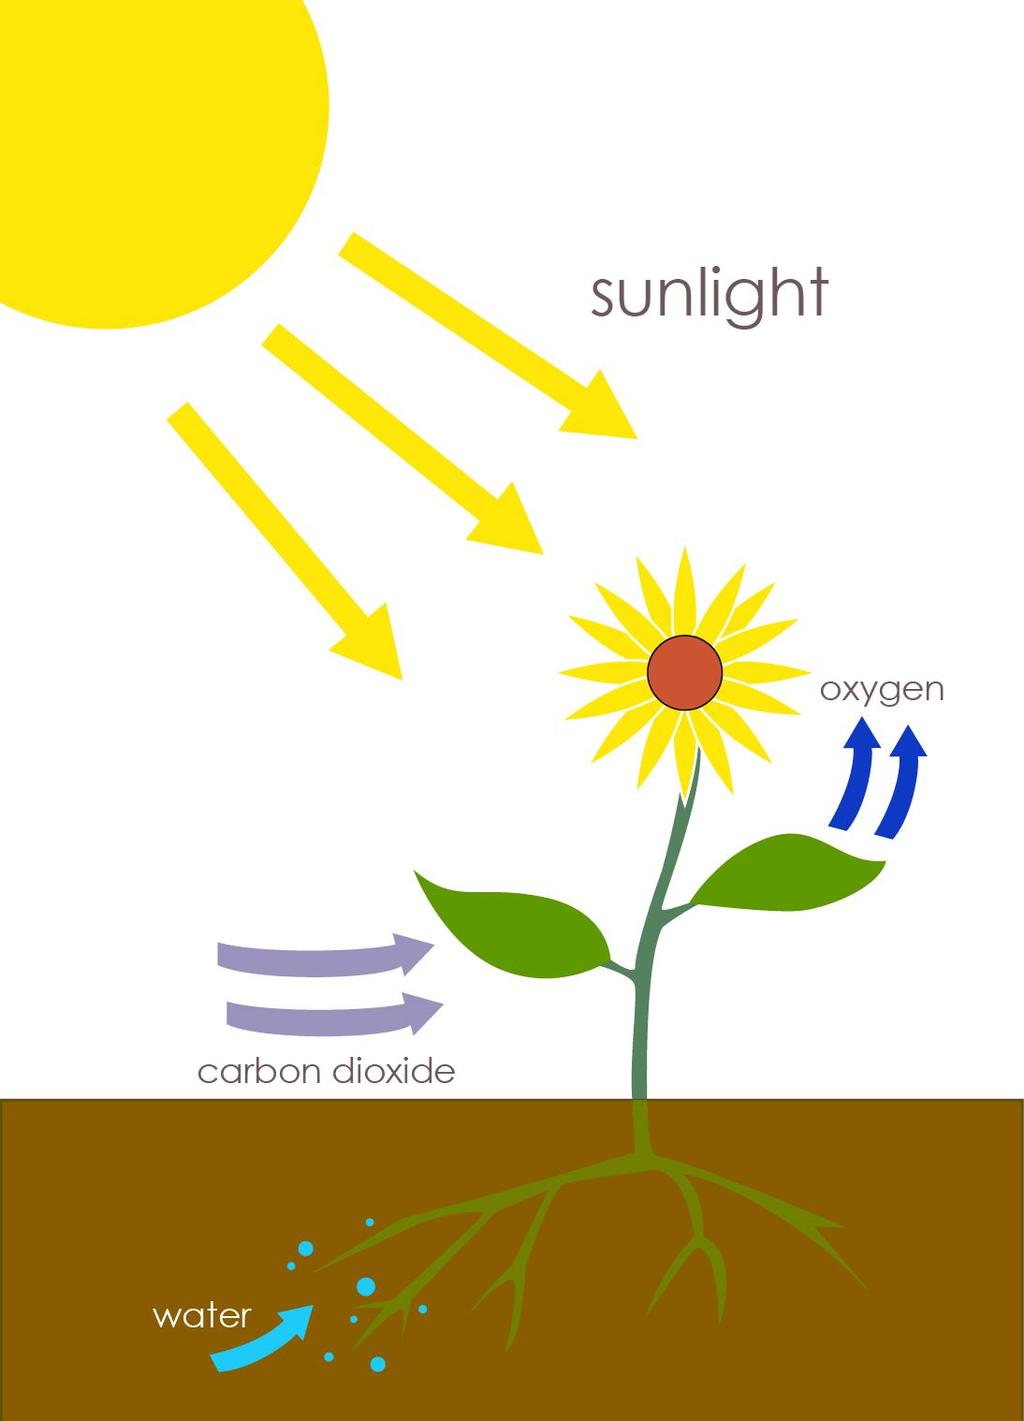 Photosynthesis First Step of the Cycle The process used by plants to convert solar energy into chemical energy Plants